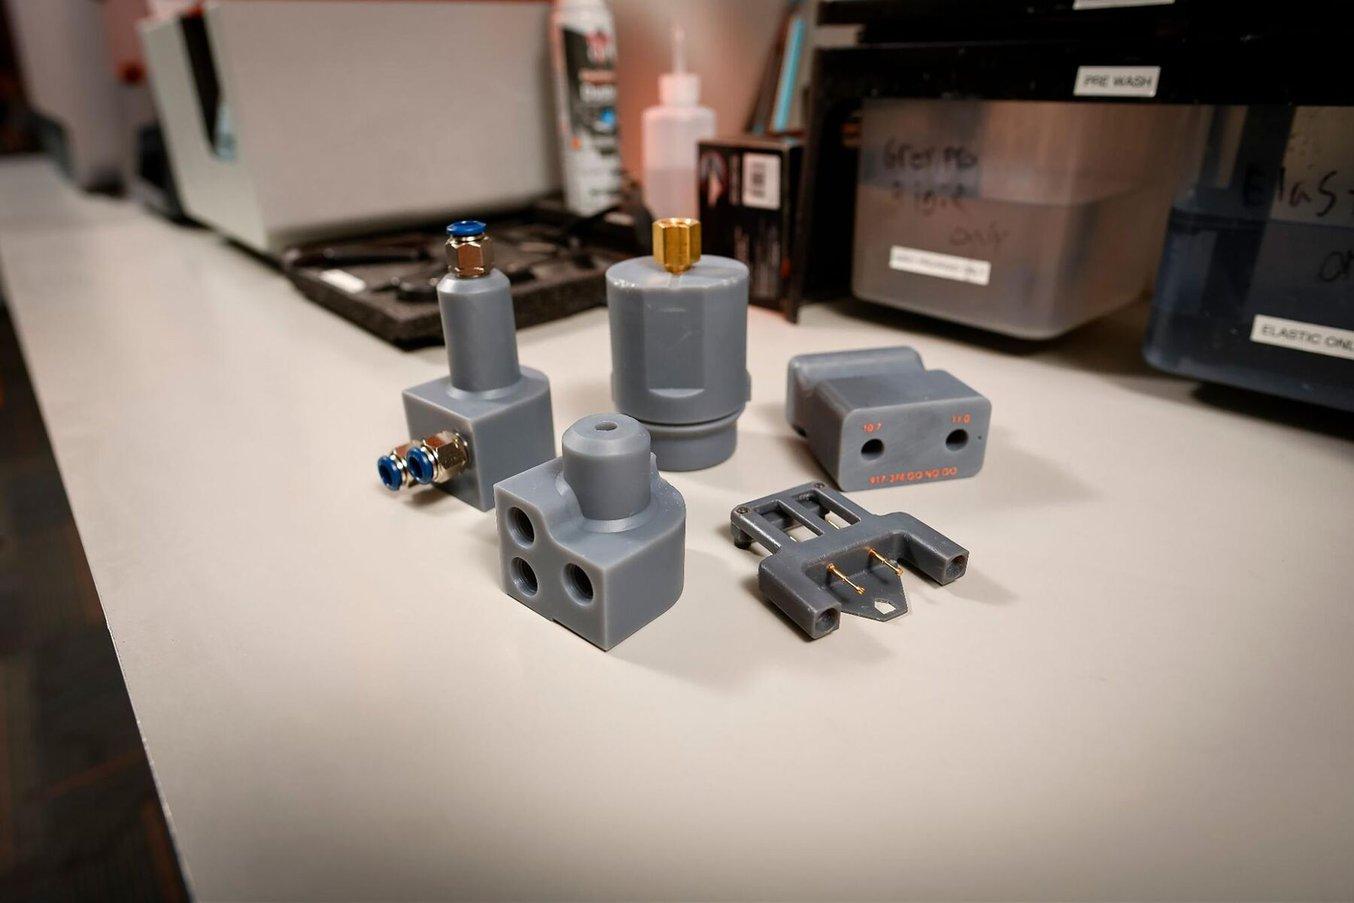 Five small jigs, some with off-the-shelf hardware incorporated, sit on a table in front of a 3D printing post-processing station.